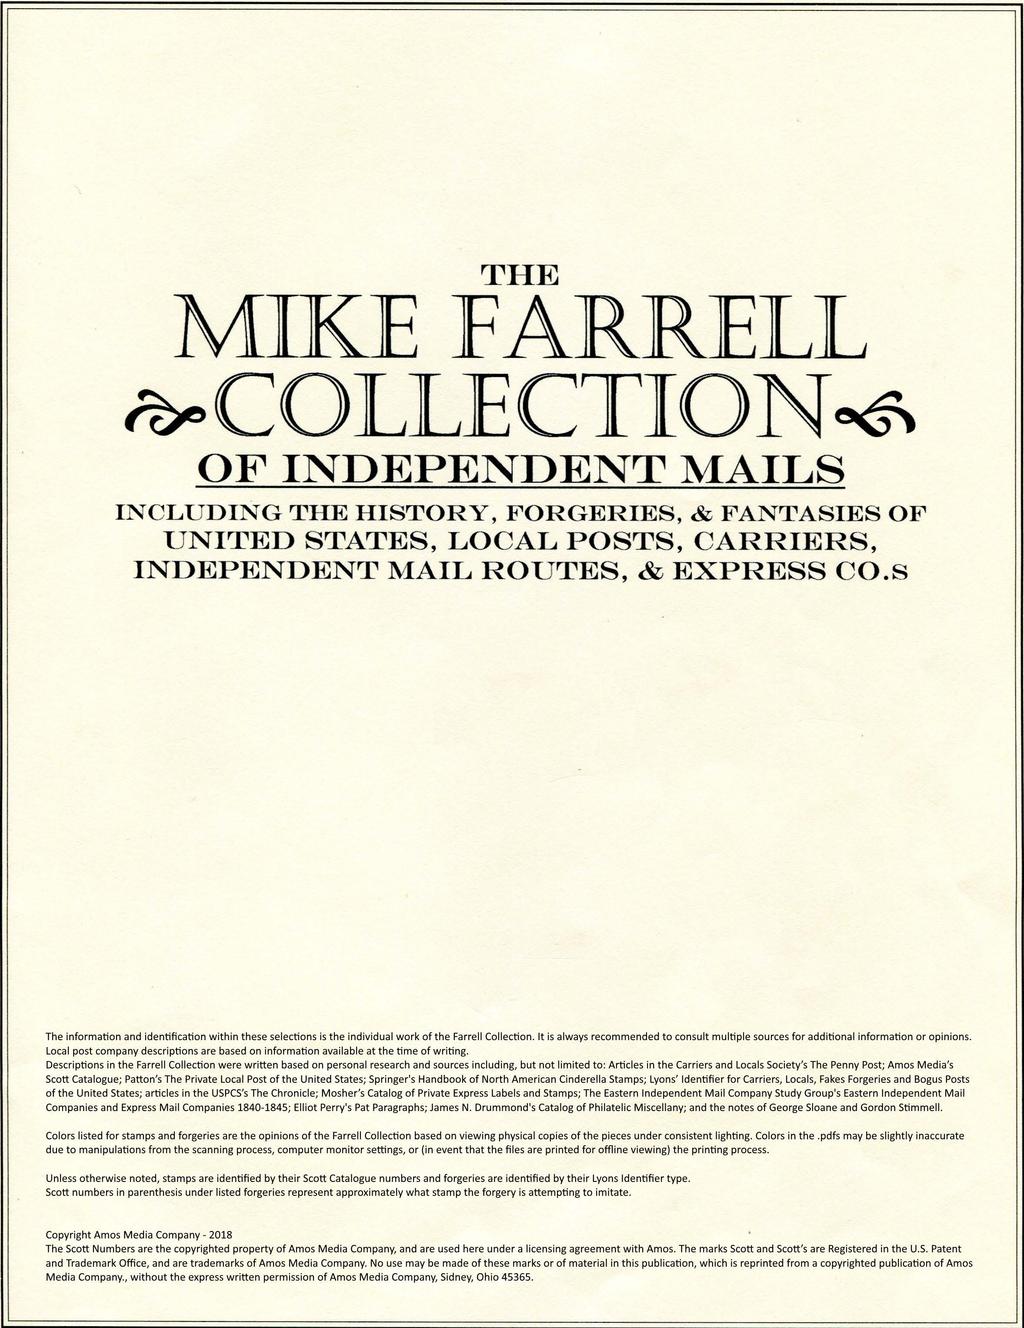 THE MIKE FARRELL ~COLLECTION~ OF INDEPENDENT MAILS INCL U DIN G THE HISTORY, FORGERIES, & FAN TASIES OF U NITED STATES, LOCAL POSTS, CARRIERS, INDEPENDENT MAIL ROU TES, & EXPRESS CO.